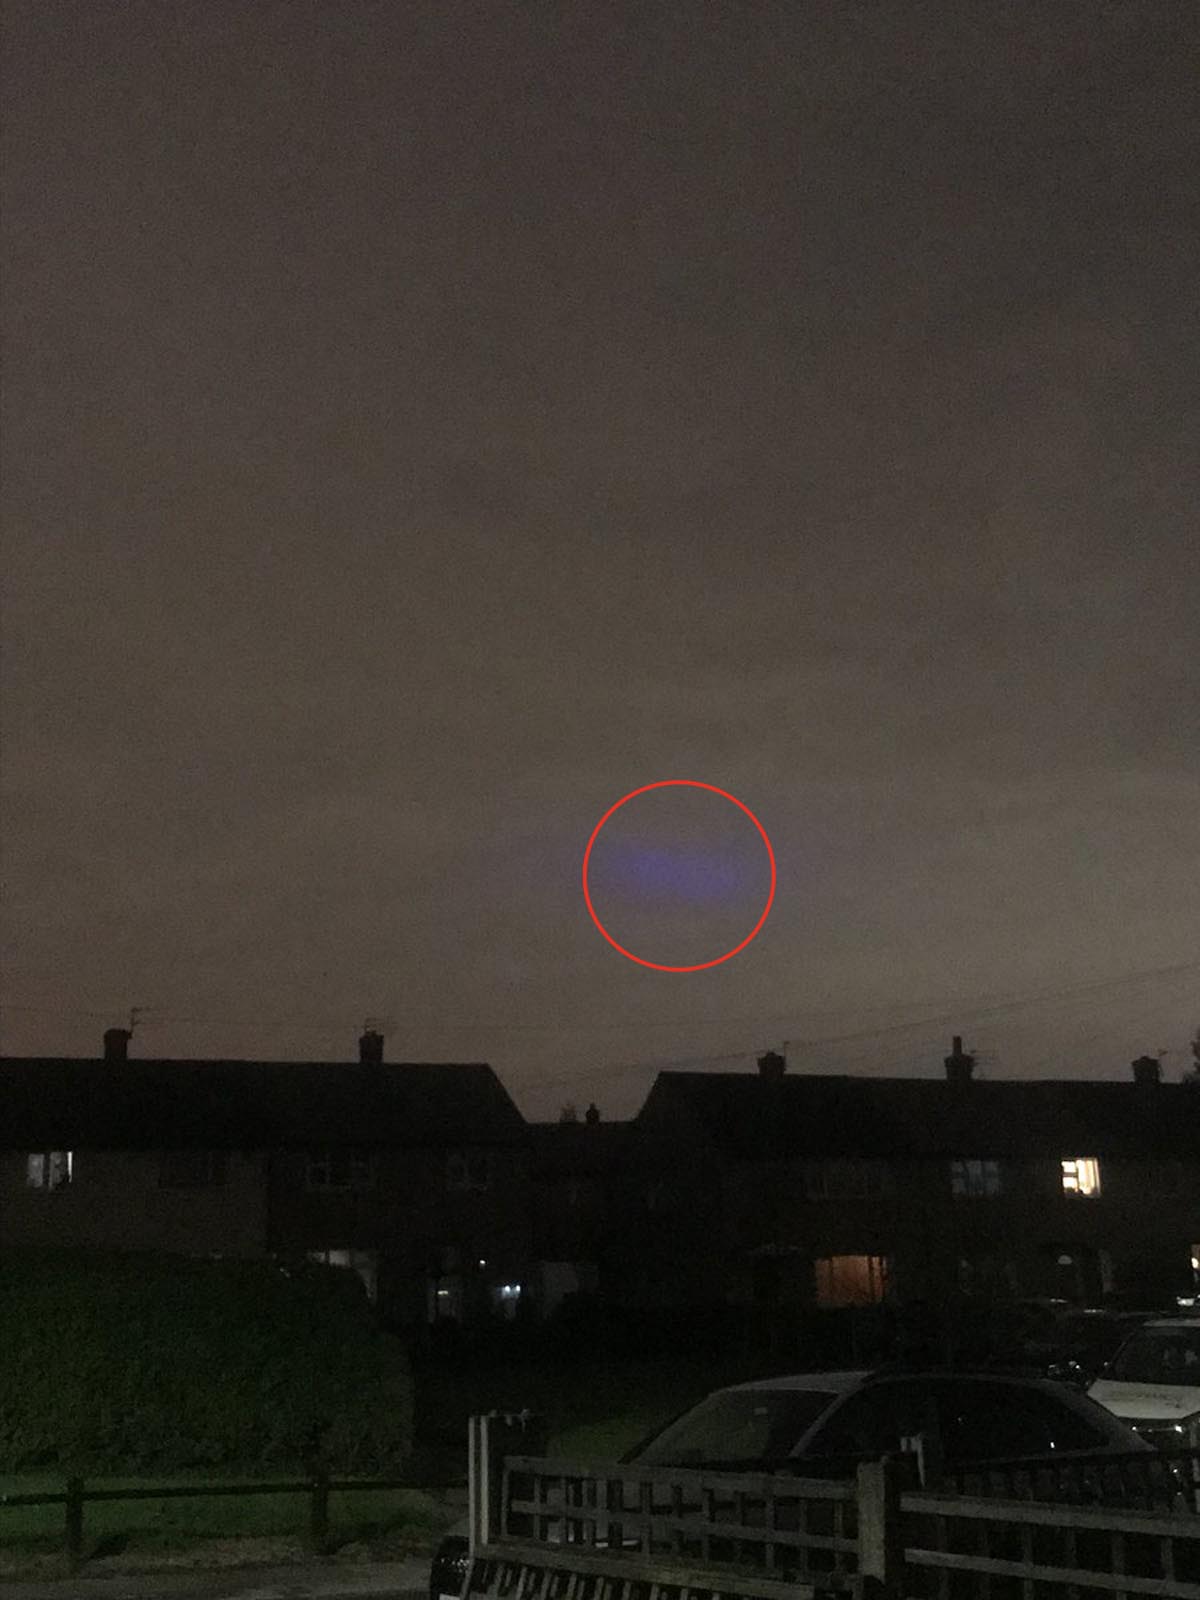 Purple light spotted has been explained by Network Rail 